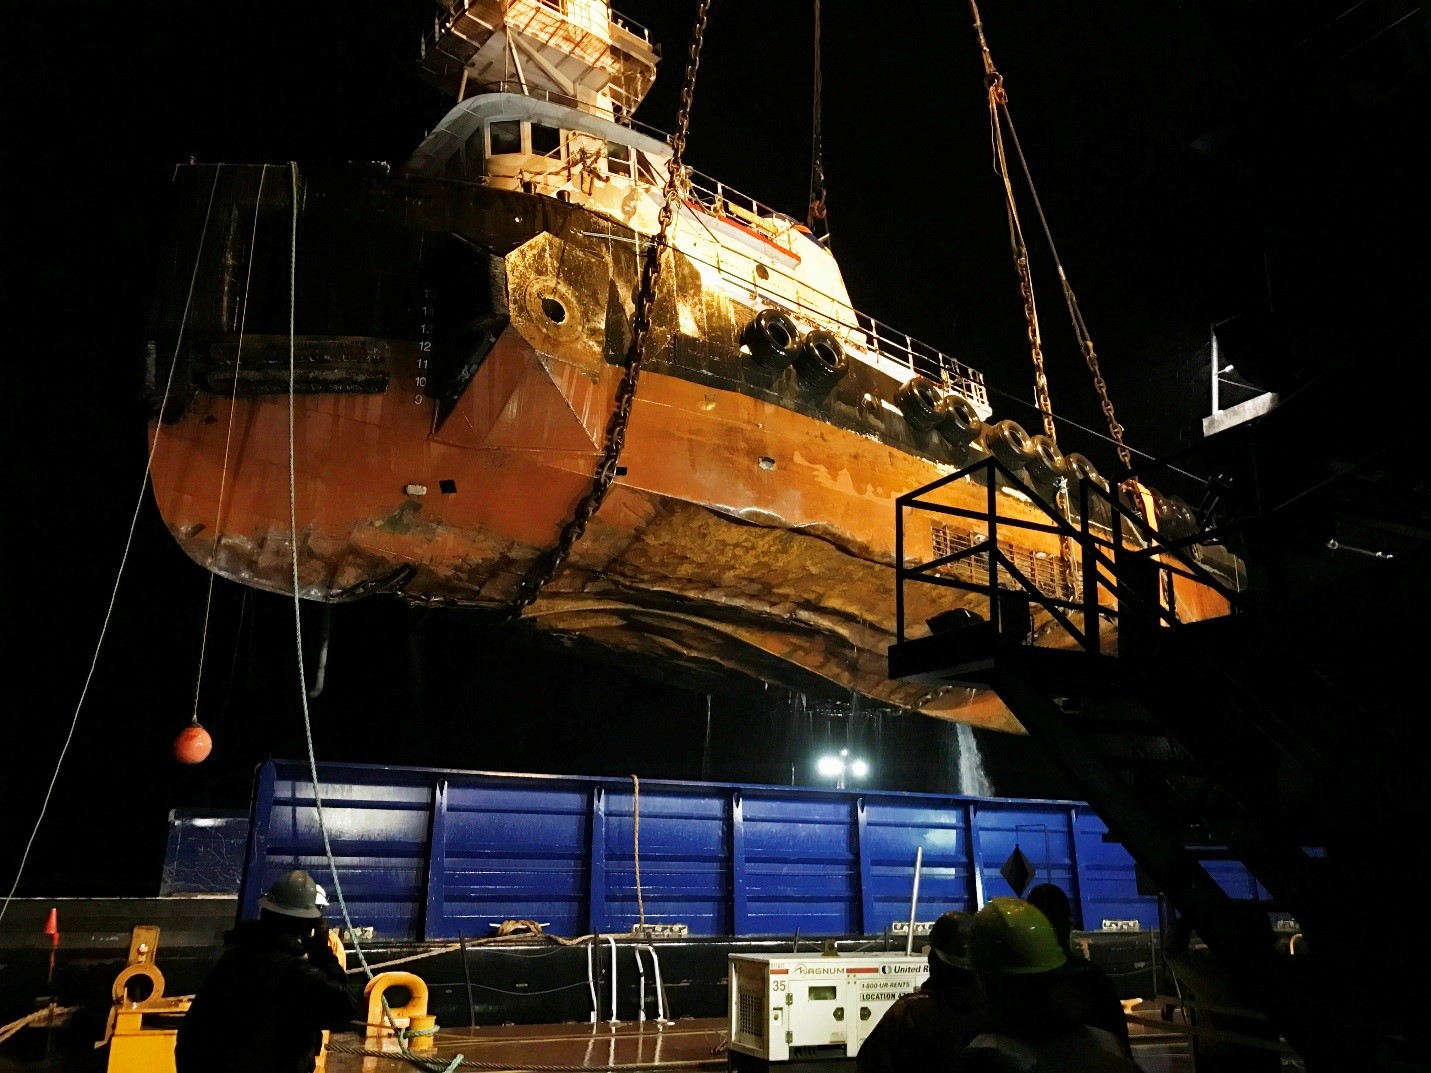 A ship is seen from below being hoisted above the water. This photograph was taken at night.